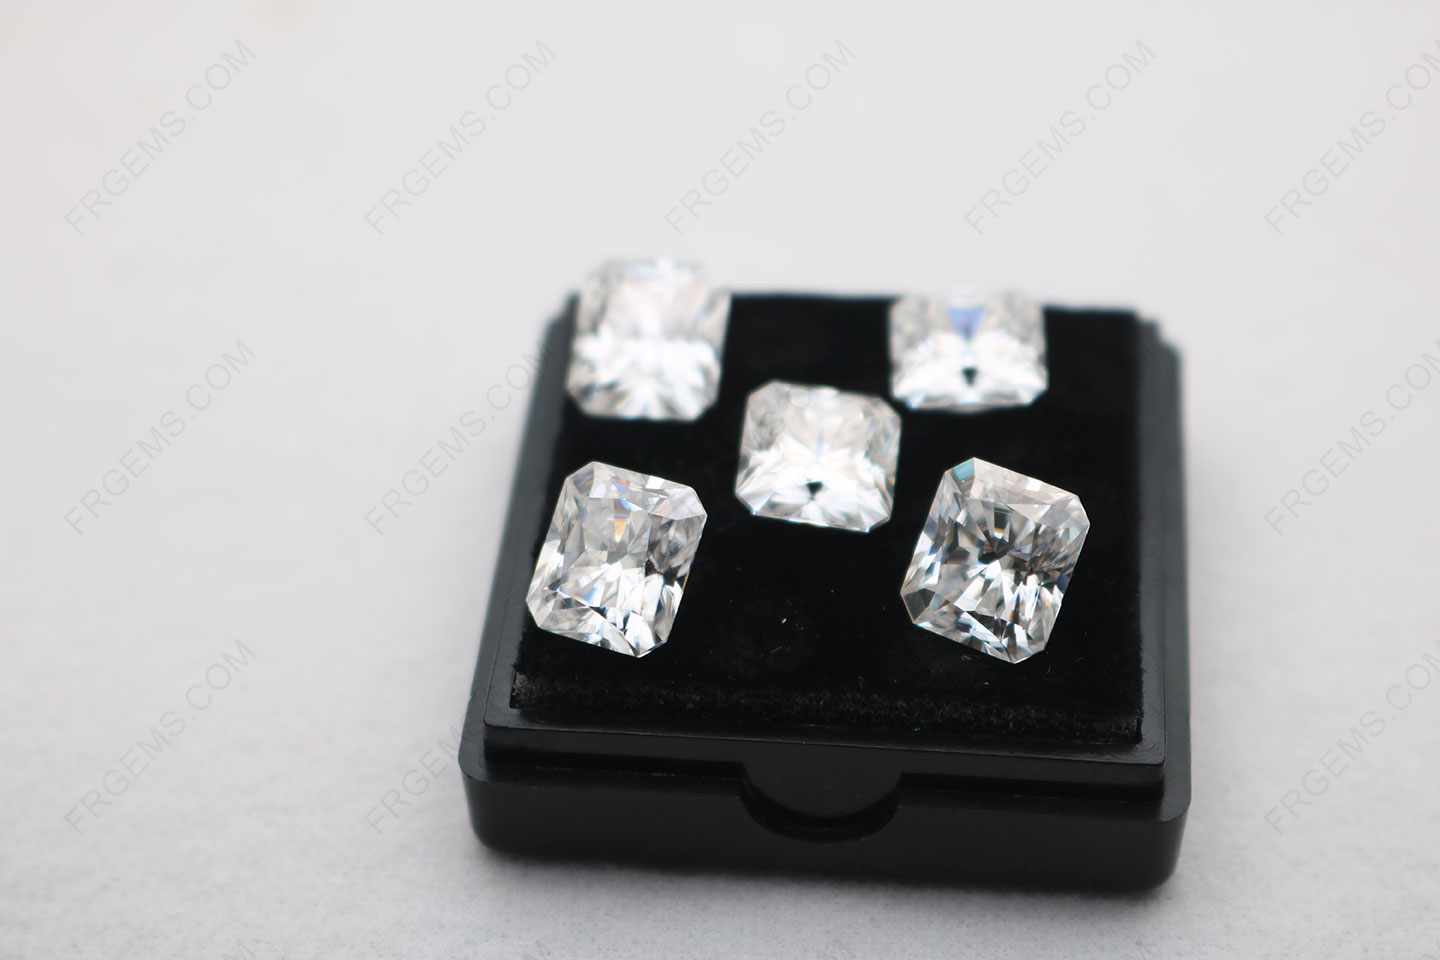 Buy Best quality Loose Moissanite D White Color Radiant cut 10x9mm gemstones from China